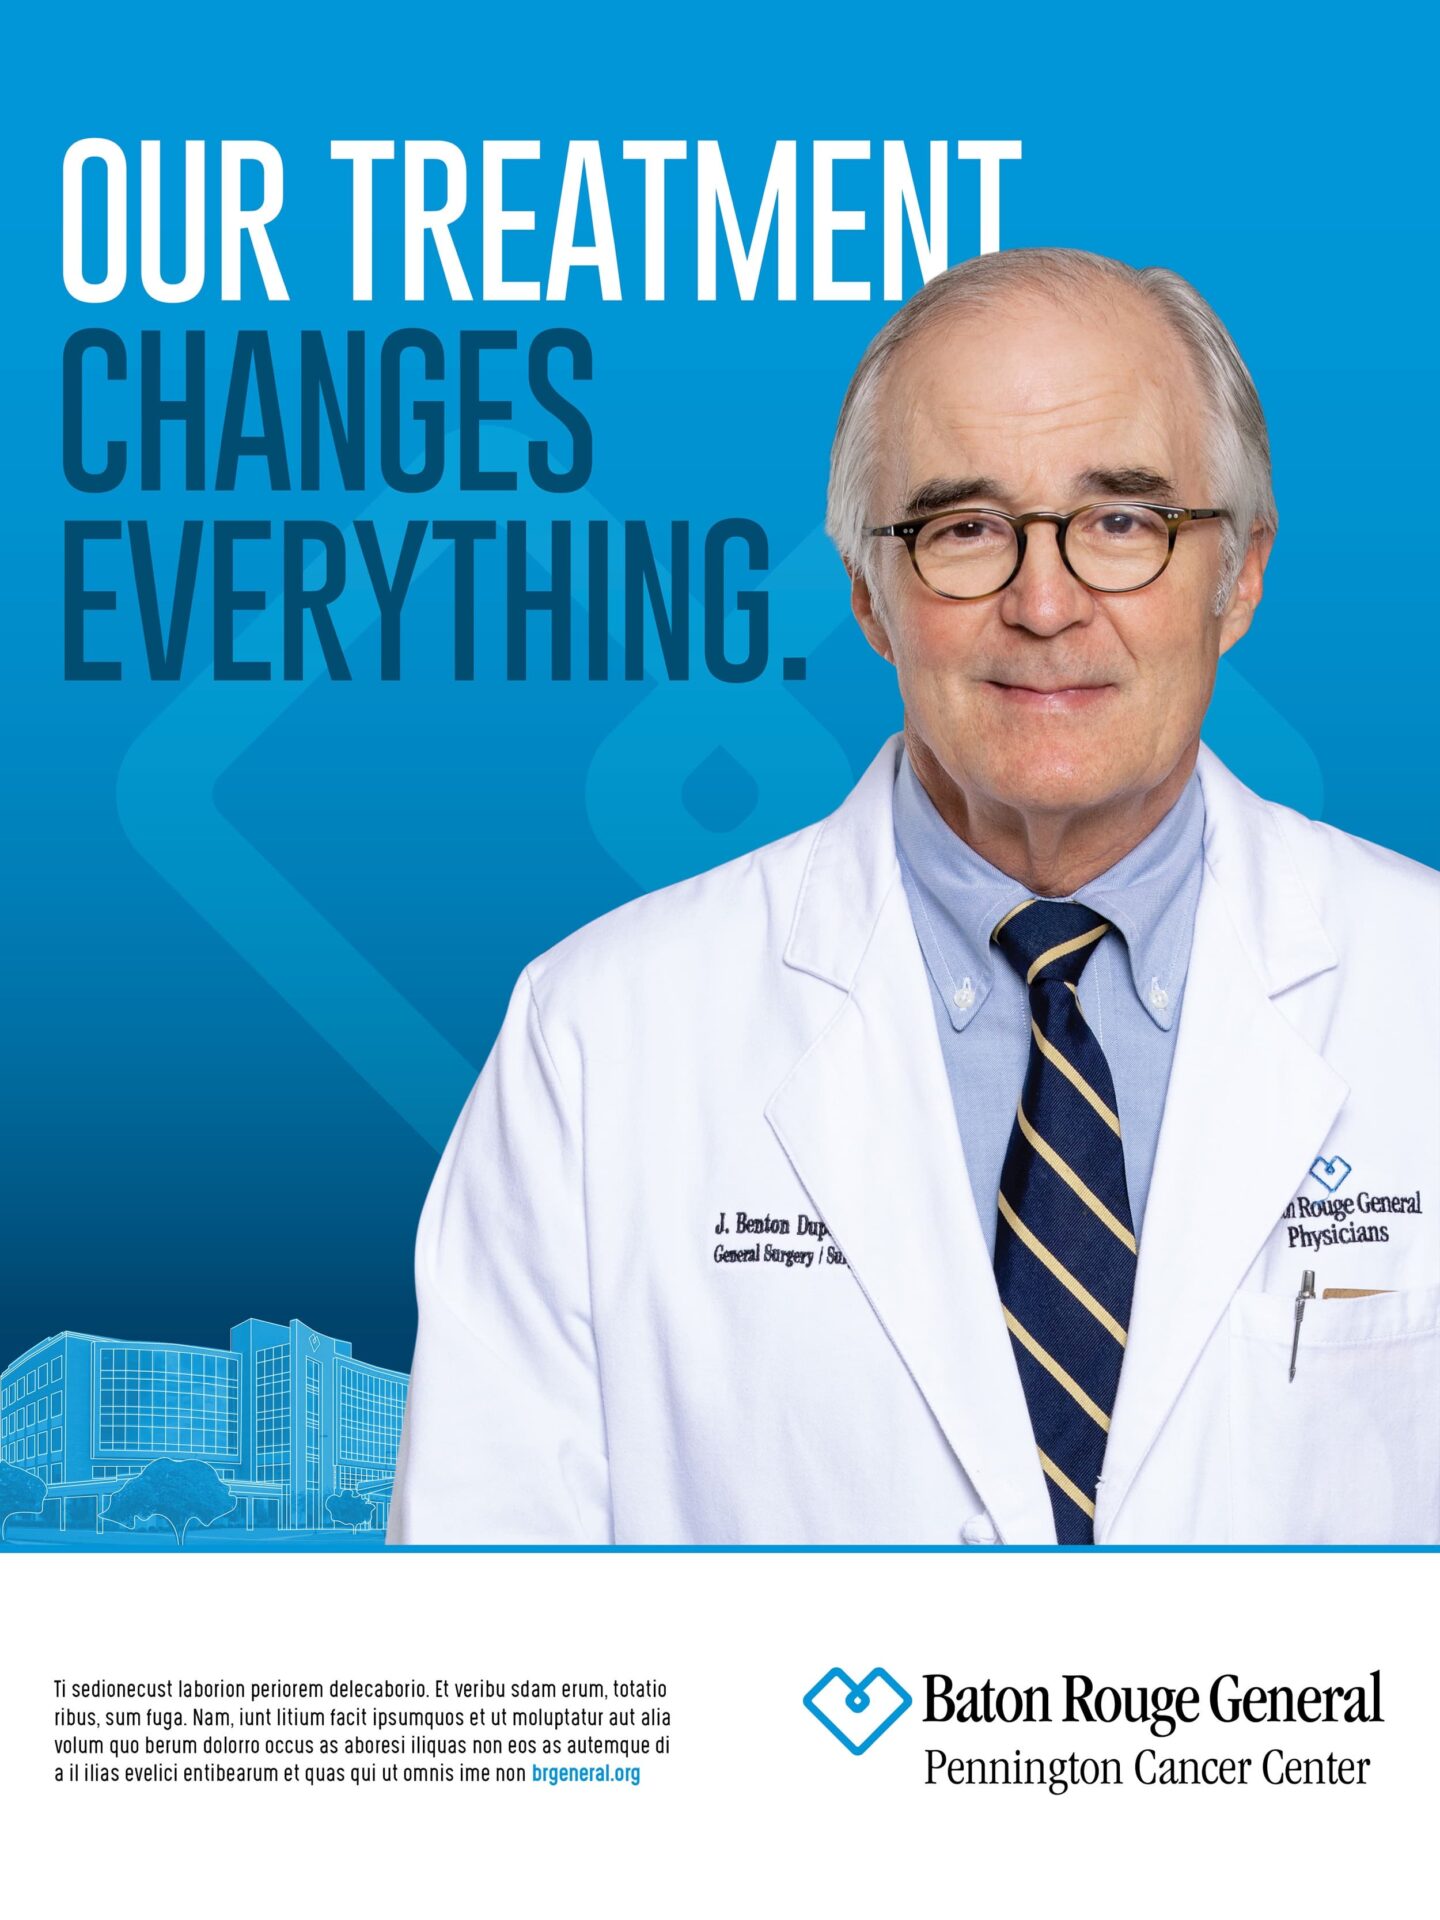 "Our treatment changes everything" in large print with a doctor standing next to it.